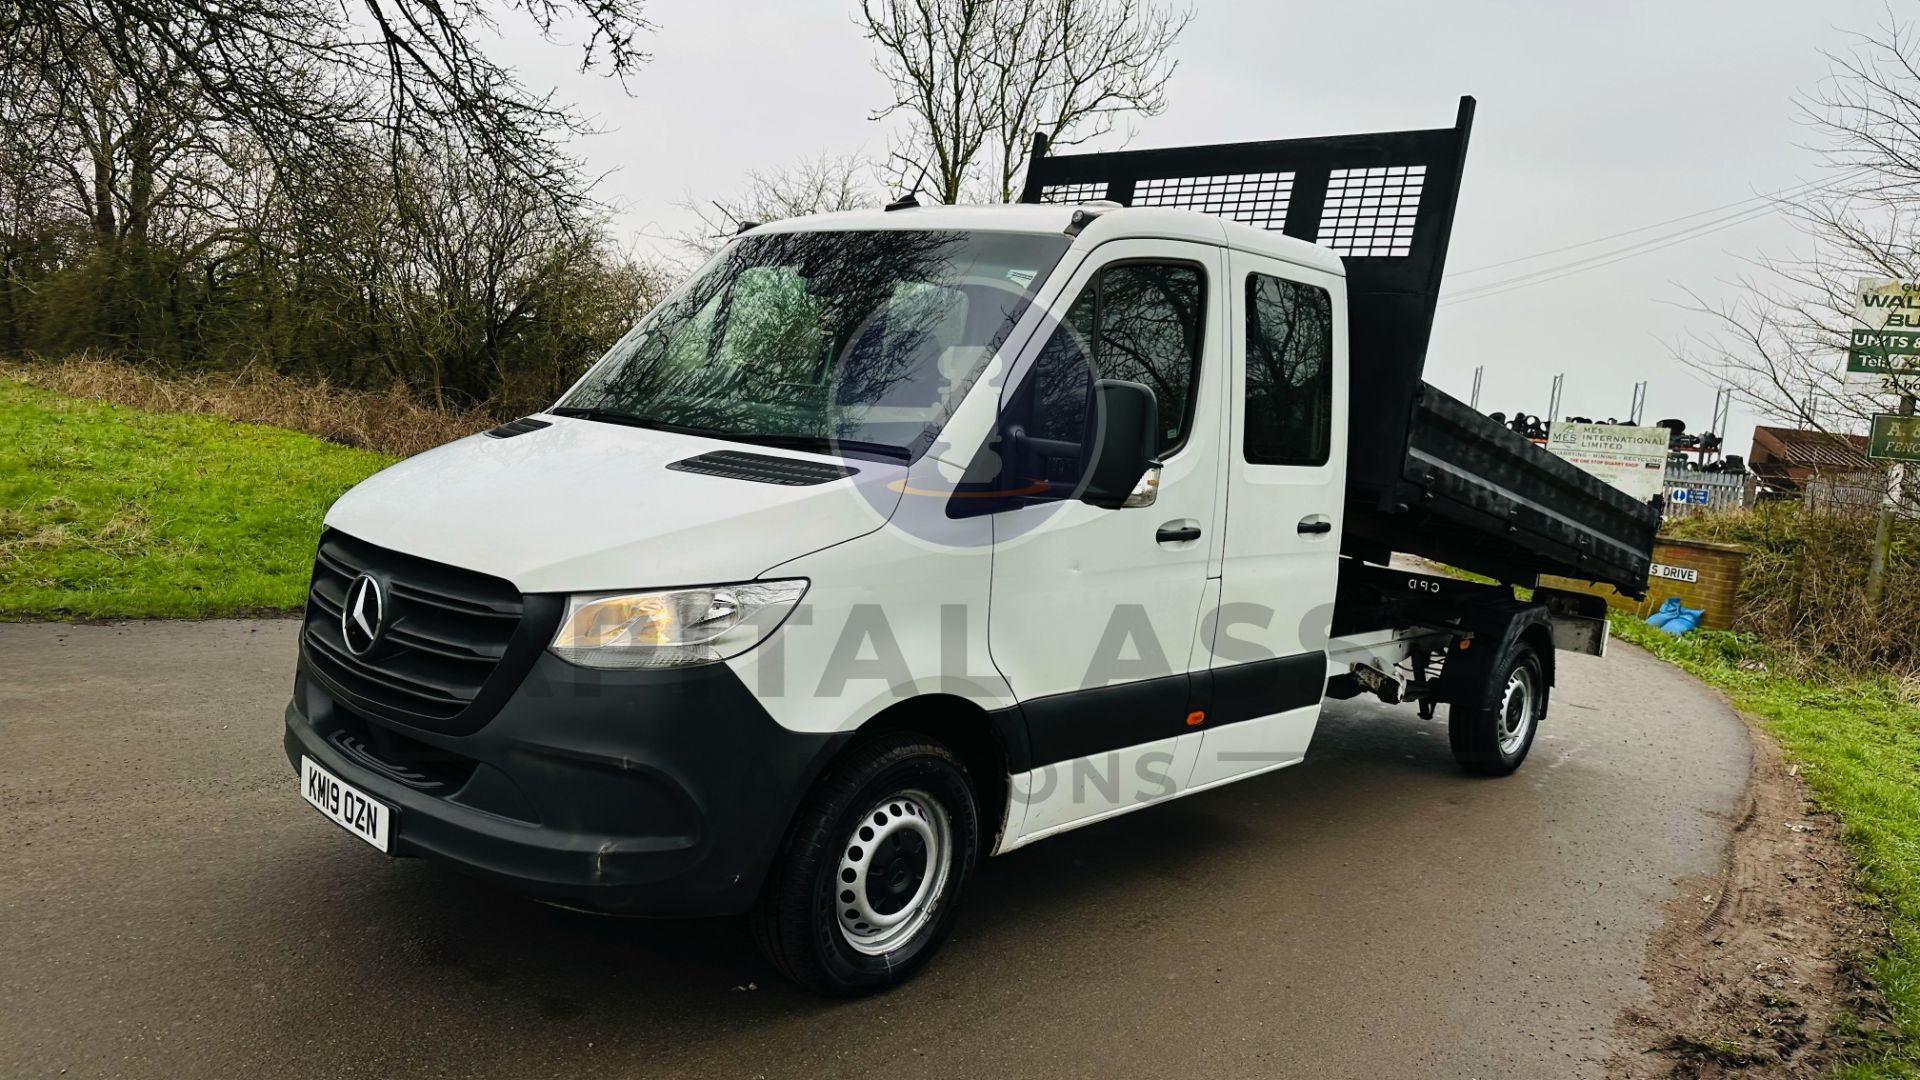 (On Sale) MERCEDES-BENZ SPRINTER 314 CDI *LWB - 7 SEATER D/CAB TIPPER* (2019 - NEW MODEL) *EURO 6* - Image 8 of 38